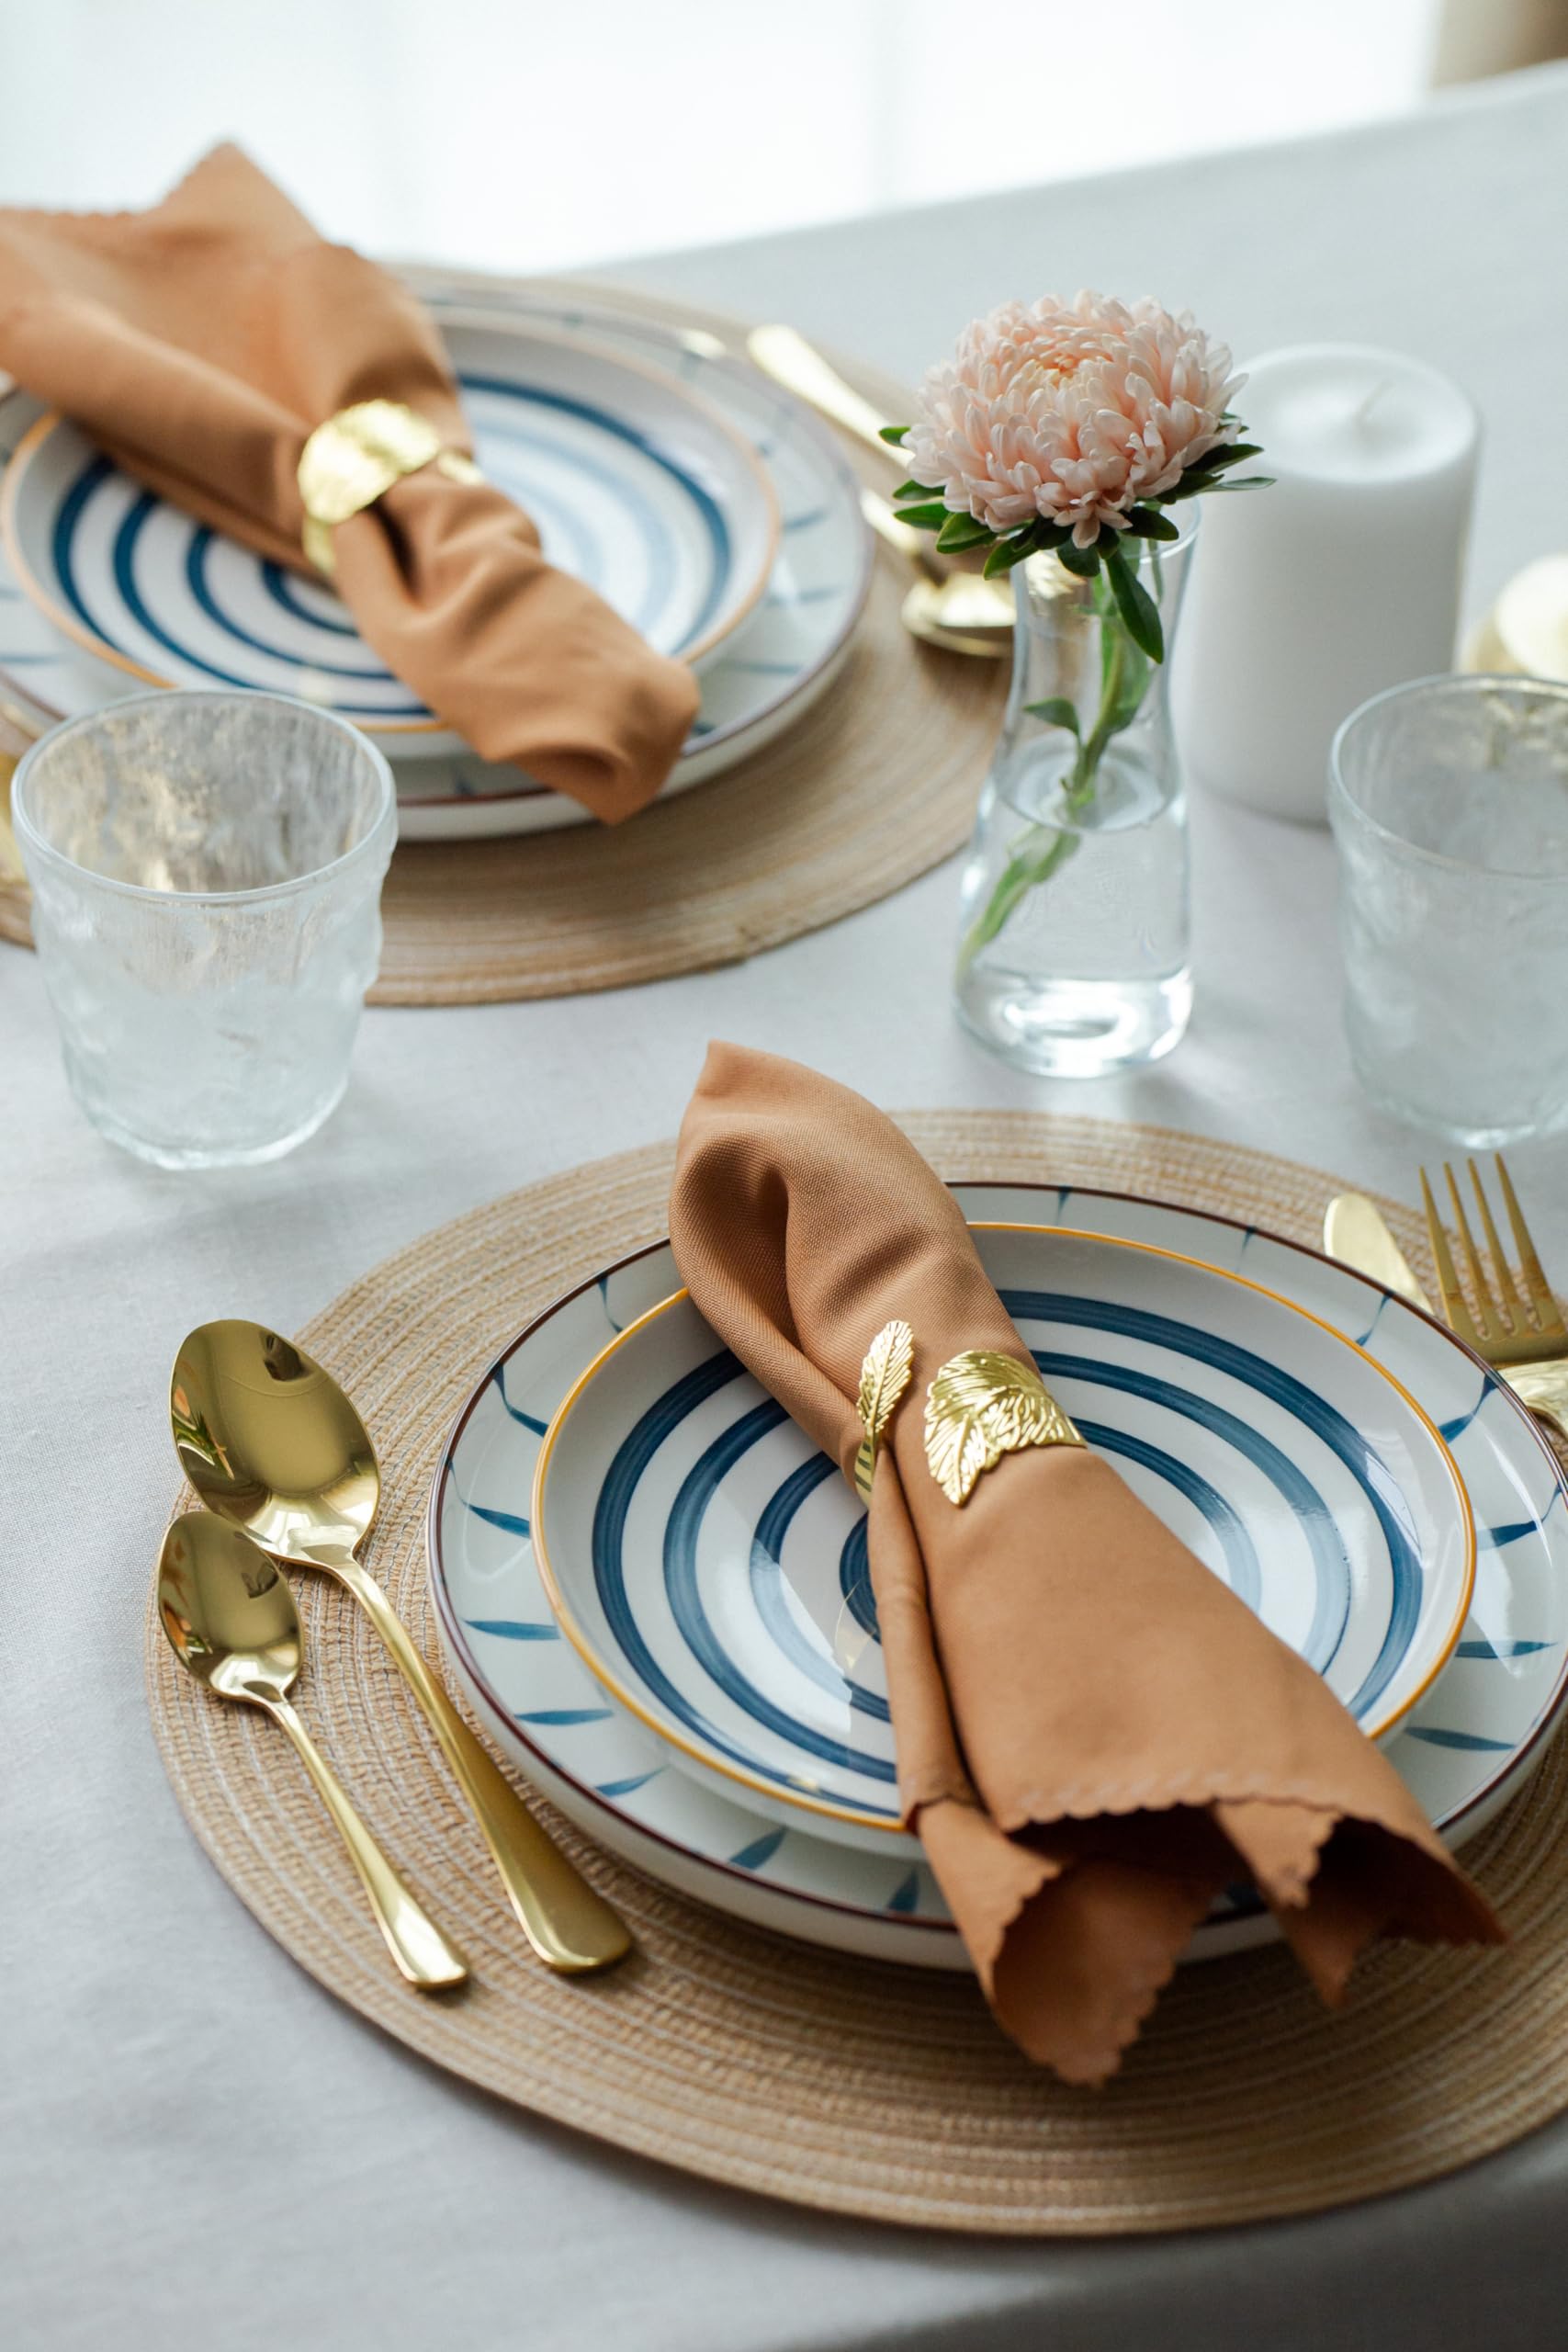 10-Piece Set All in 1 Dinnerware Set for 1 Person Dish Set Blue & White Cute Single Person Farmhouse Dinnerware 2 White Plates/Gold Cutlery/Cotton Place Mat/Napkin/Napkin Holder/Water Glass